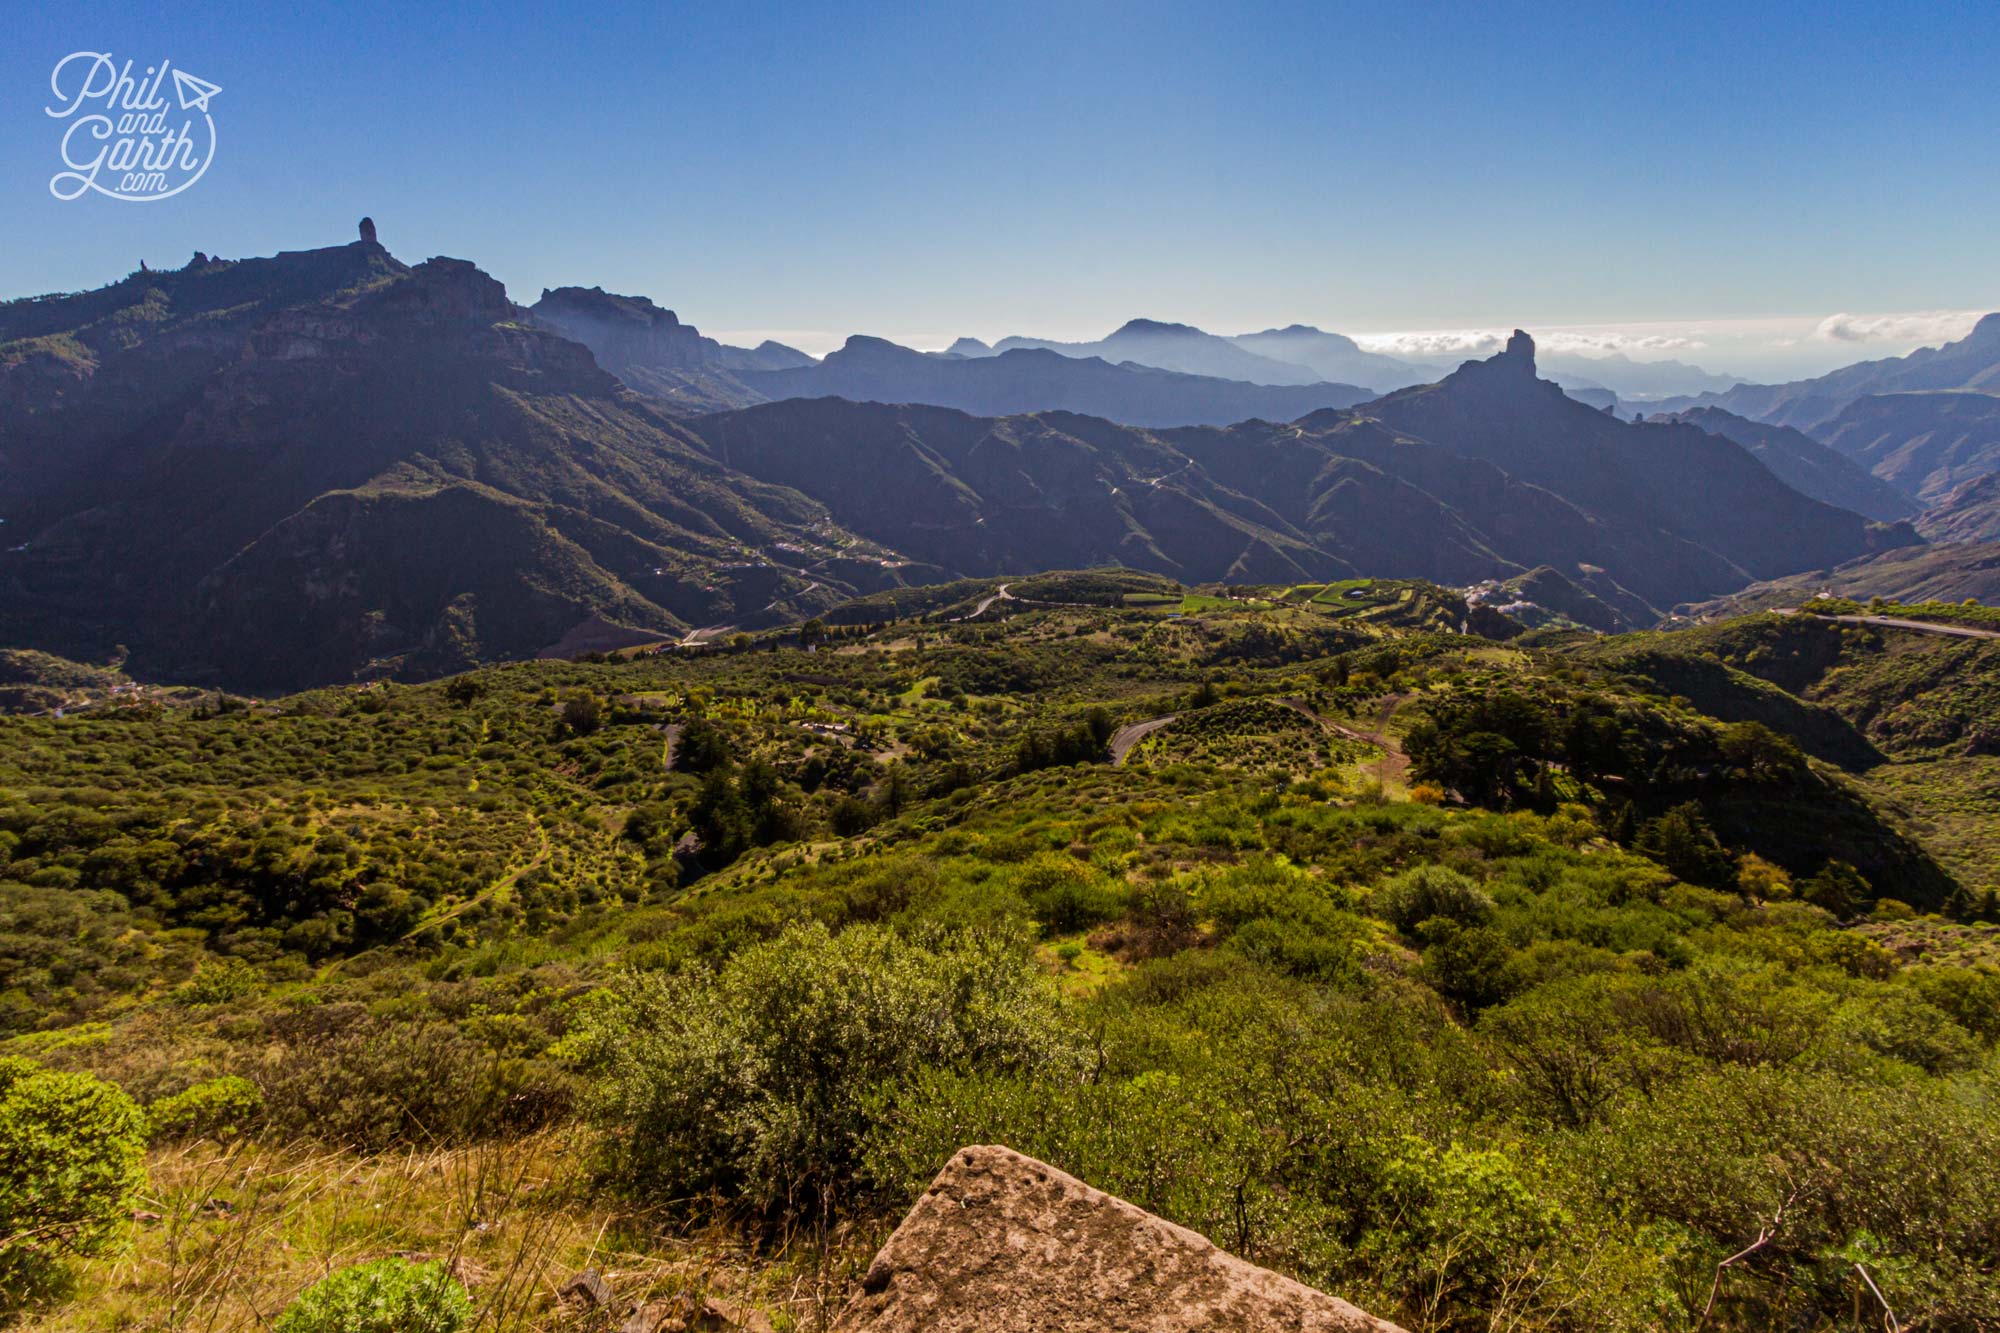 High up in Gran Canaria's mountains is the former capital - Tejeda